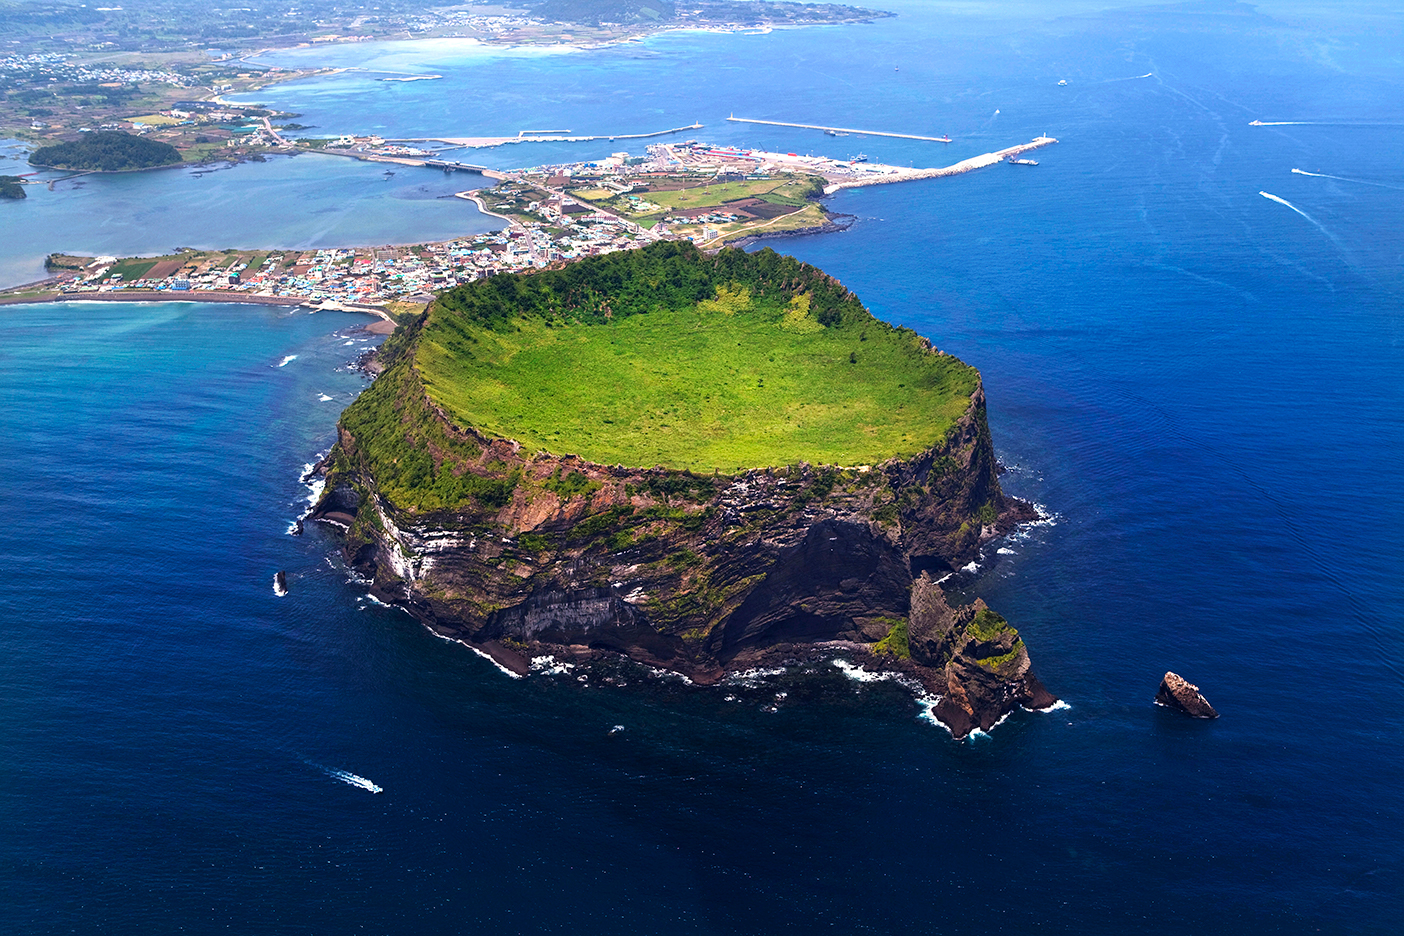 small volcanic crater in Jeju Island, South Korea - one of the best diving destinations in East Asia